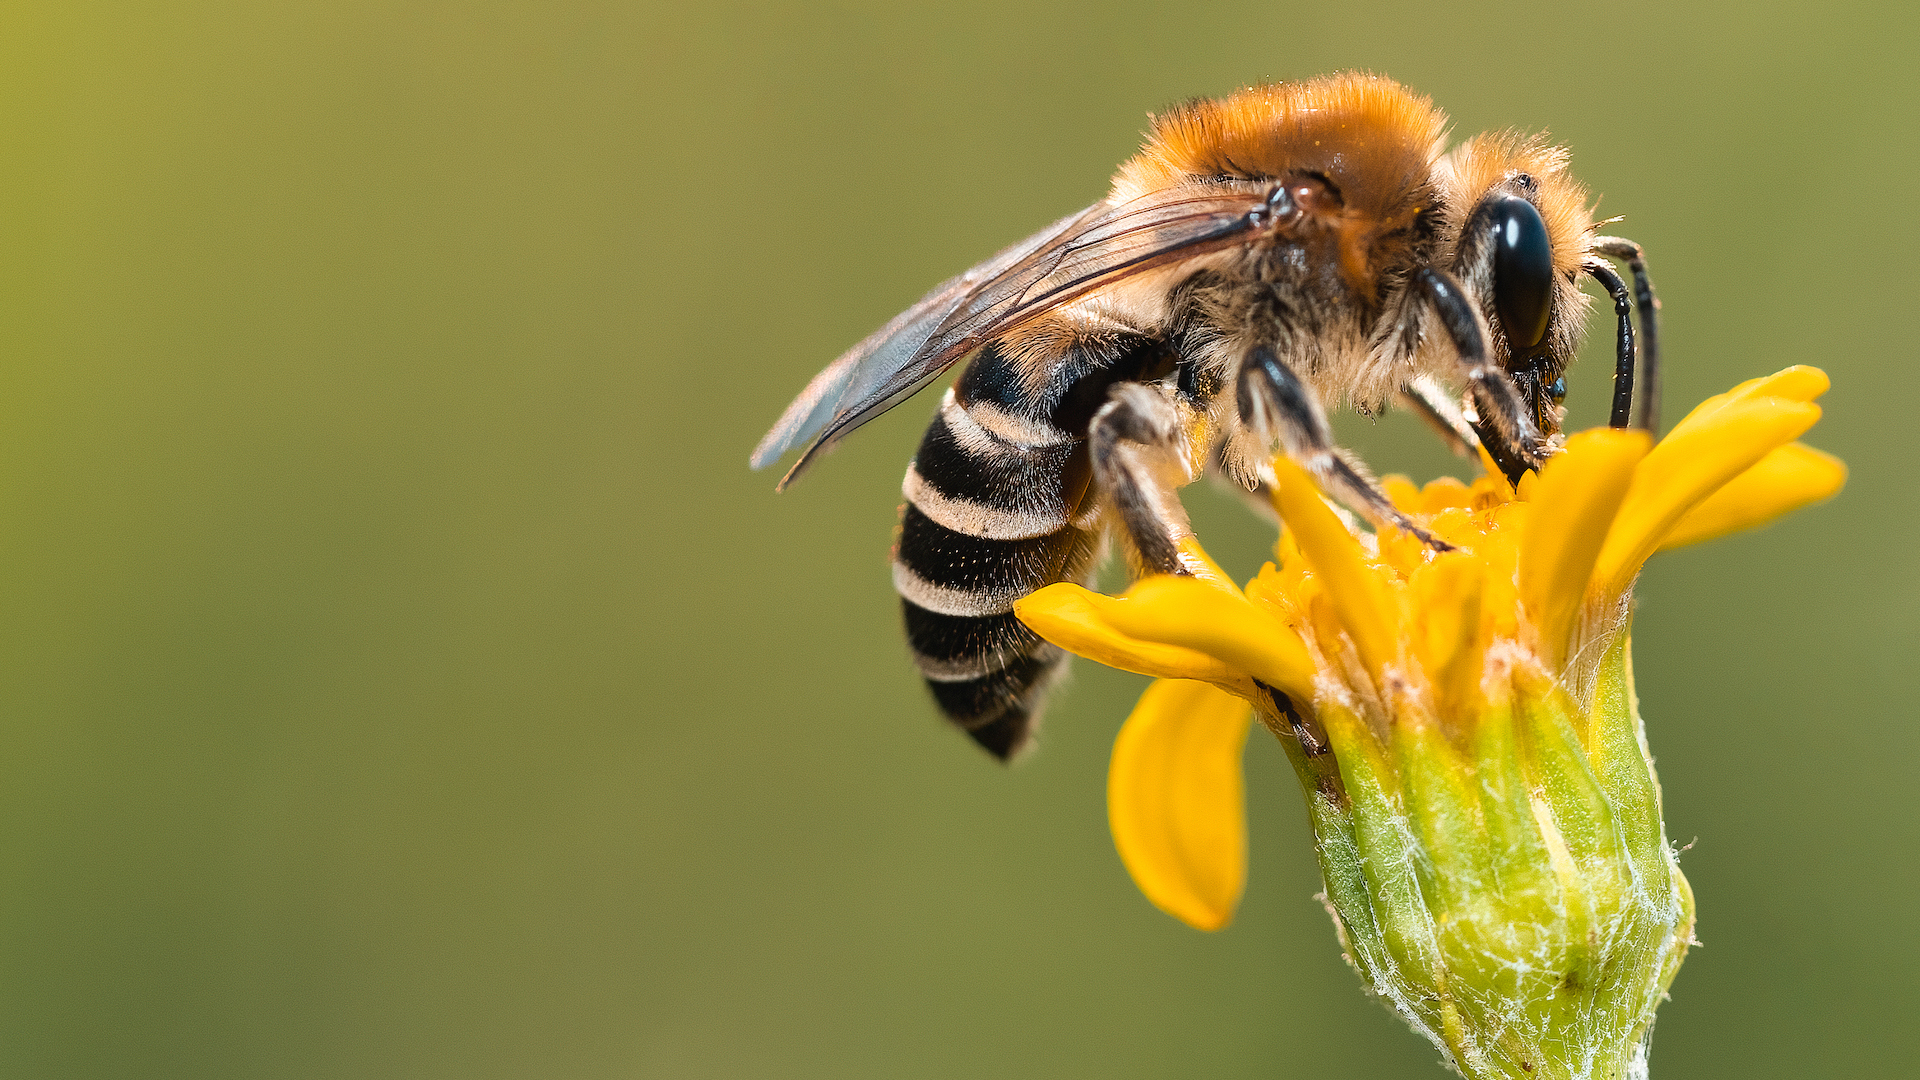 A close-up of a bee pollinating a yellow flower